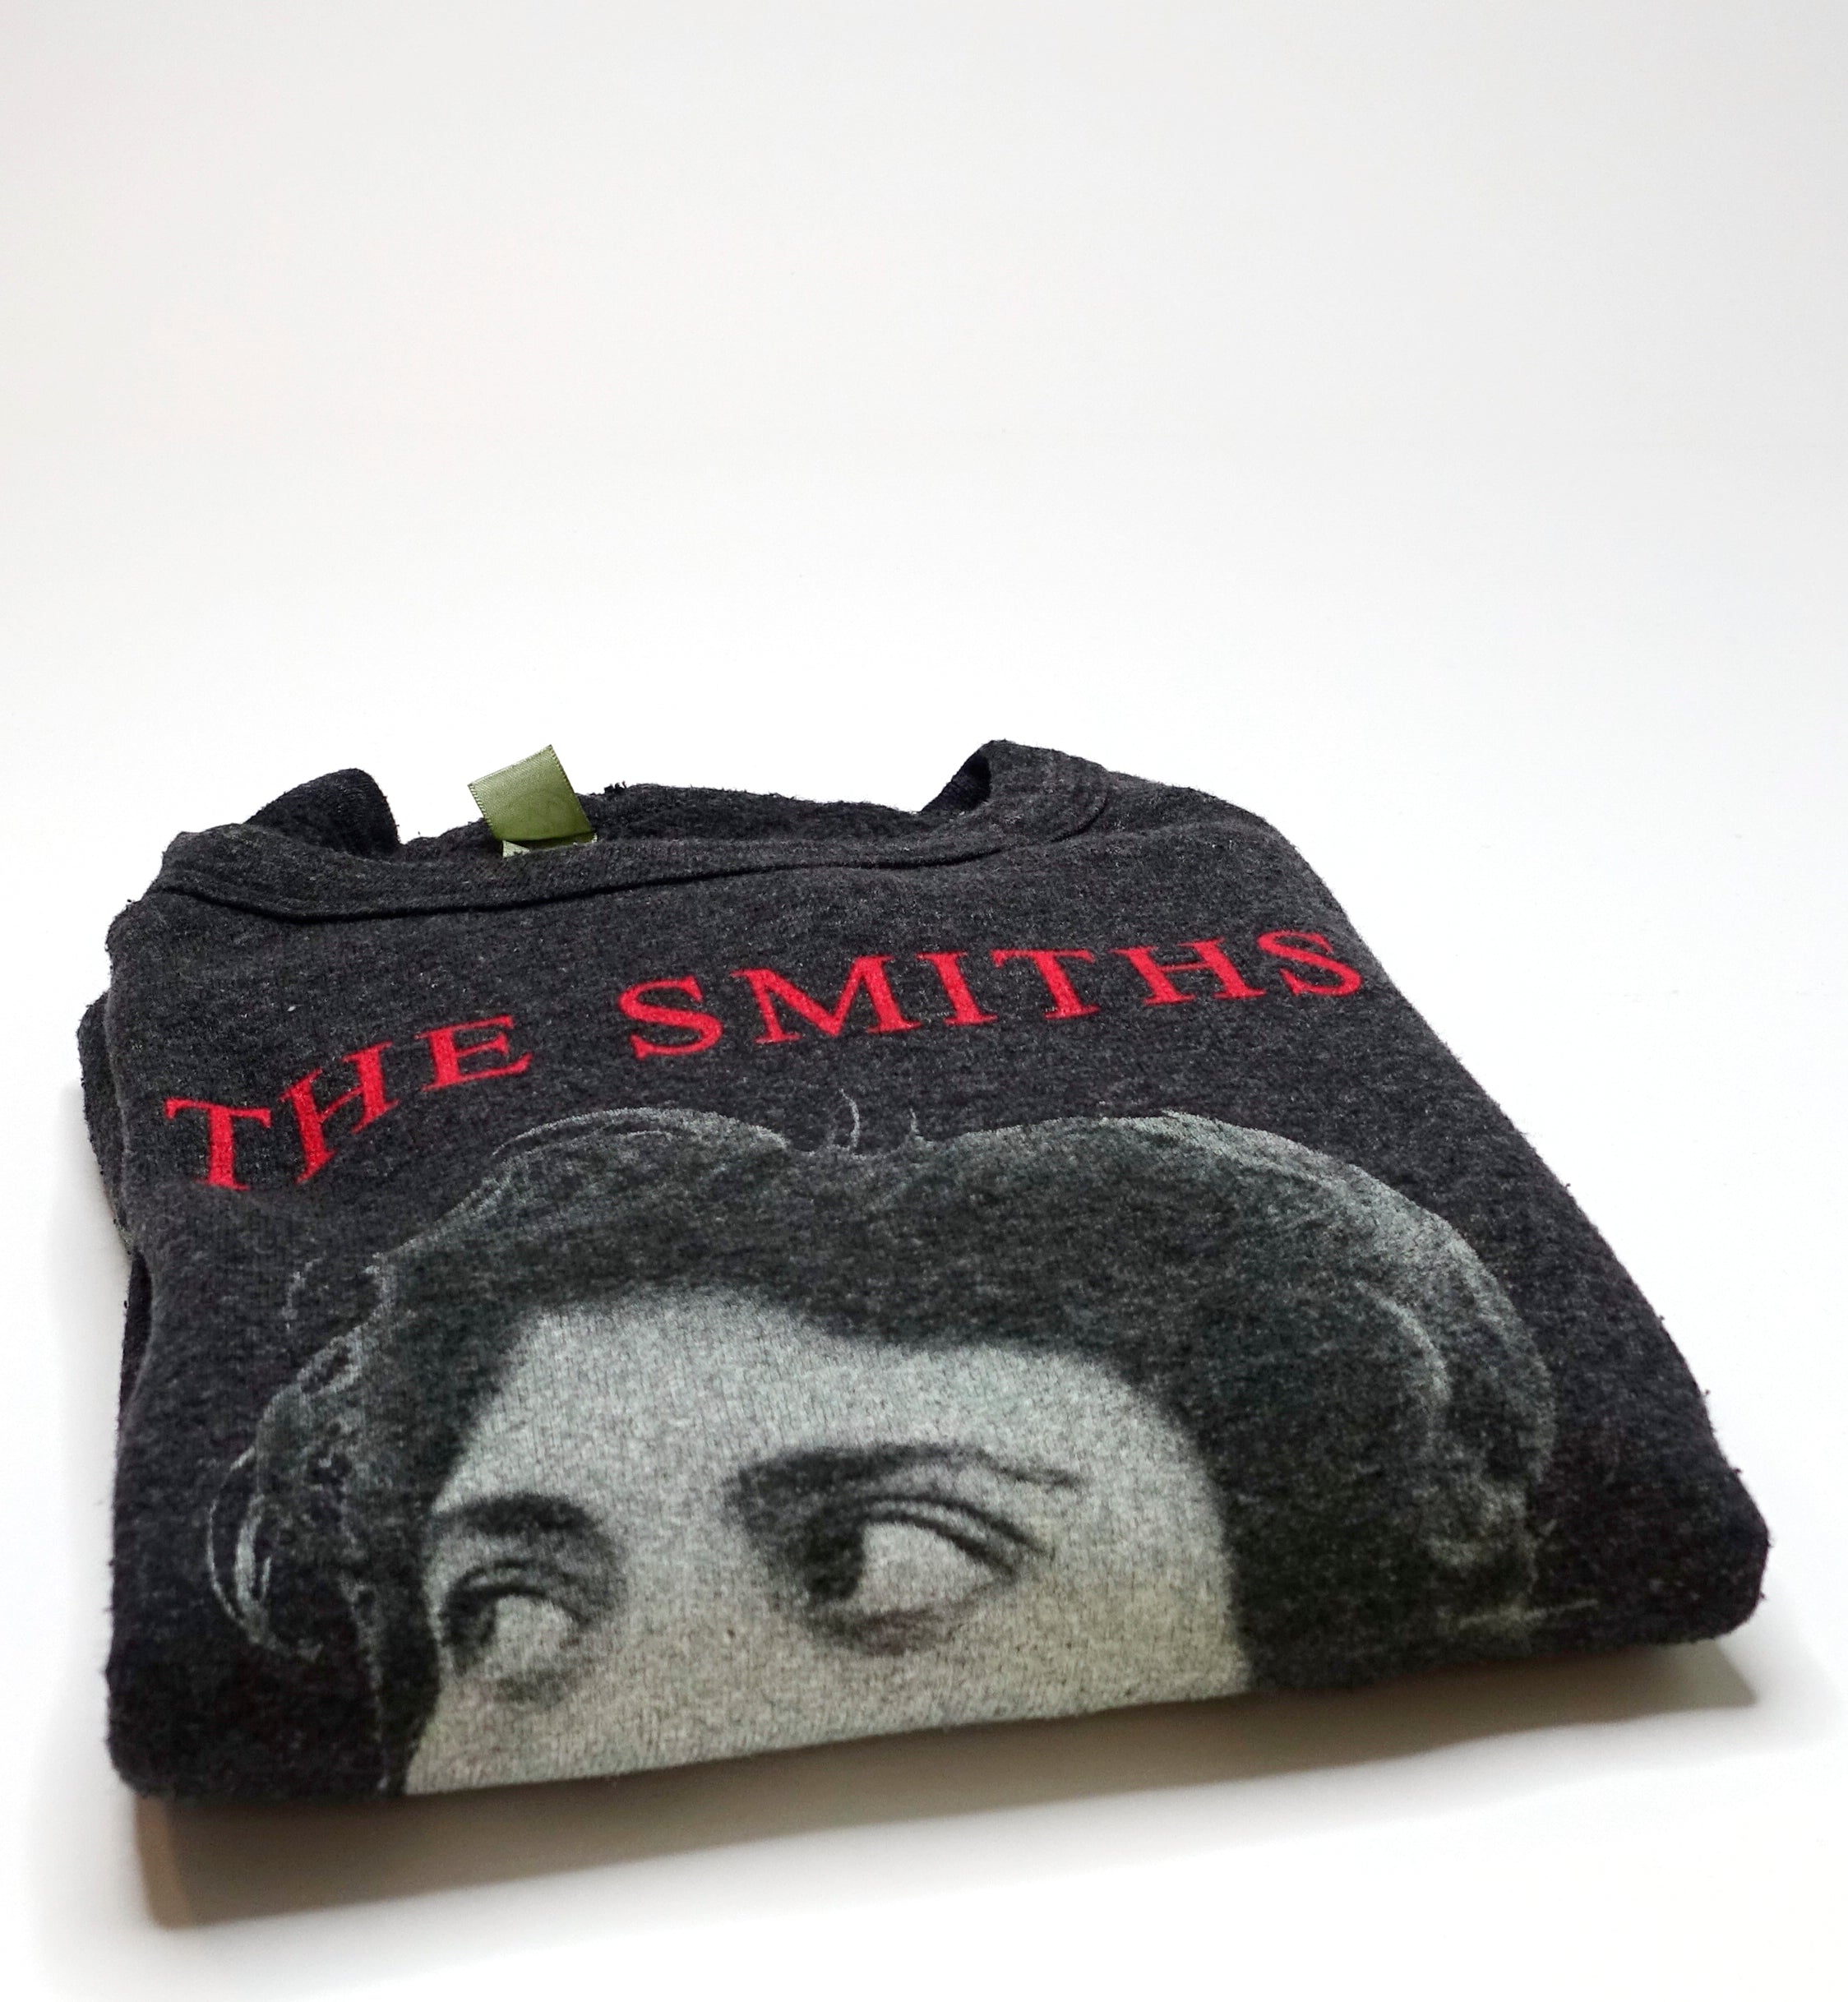 the Smiths - Girlfriend In a Coma Sweat Shirt (Bootleg by Me) Size XL